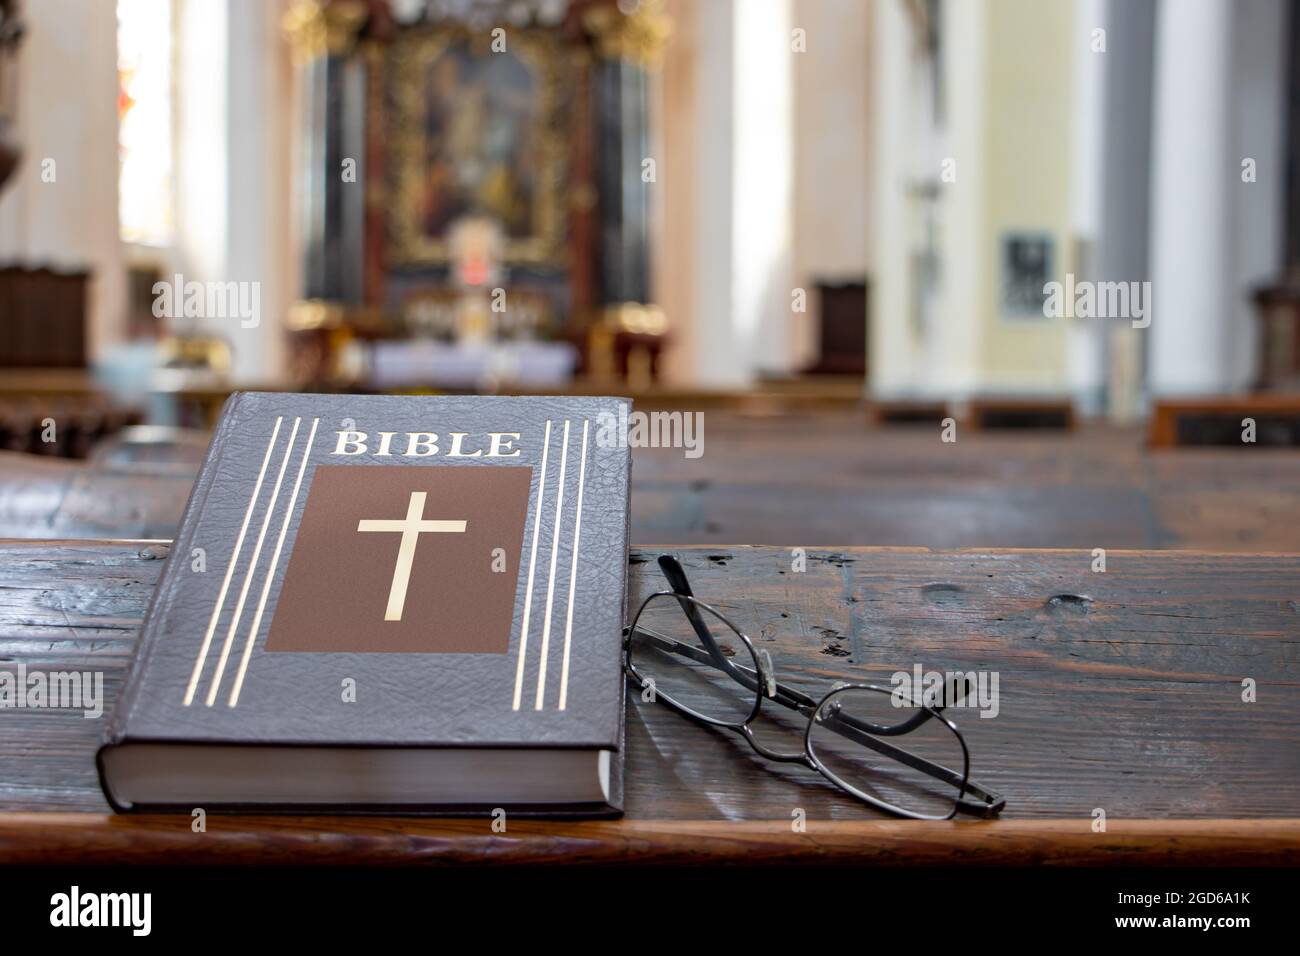 The Bible on the table of a prayer bench in the church with a altar. Stock Photo